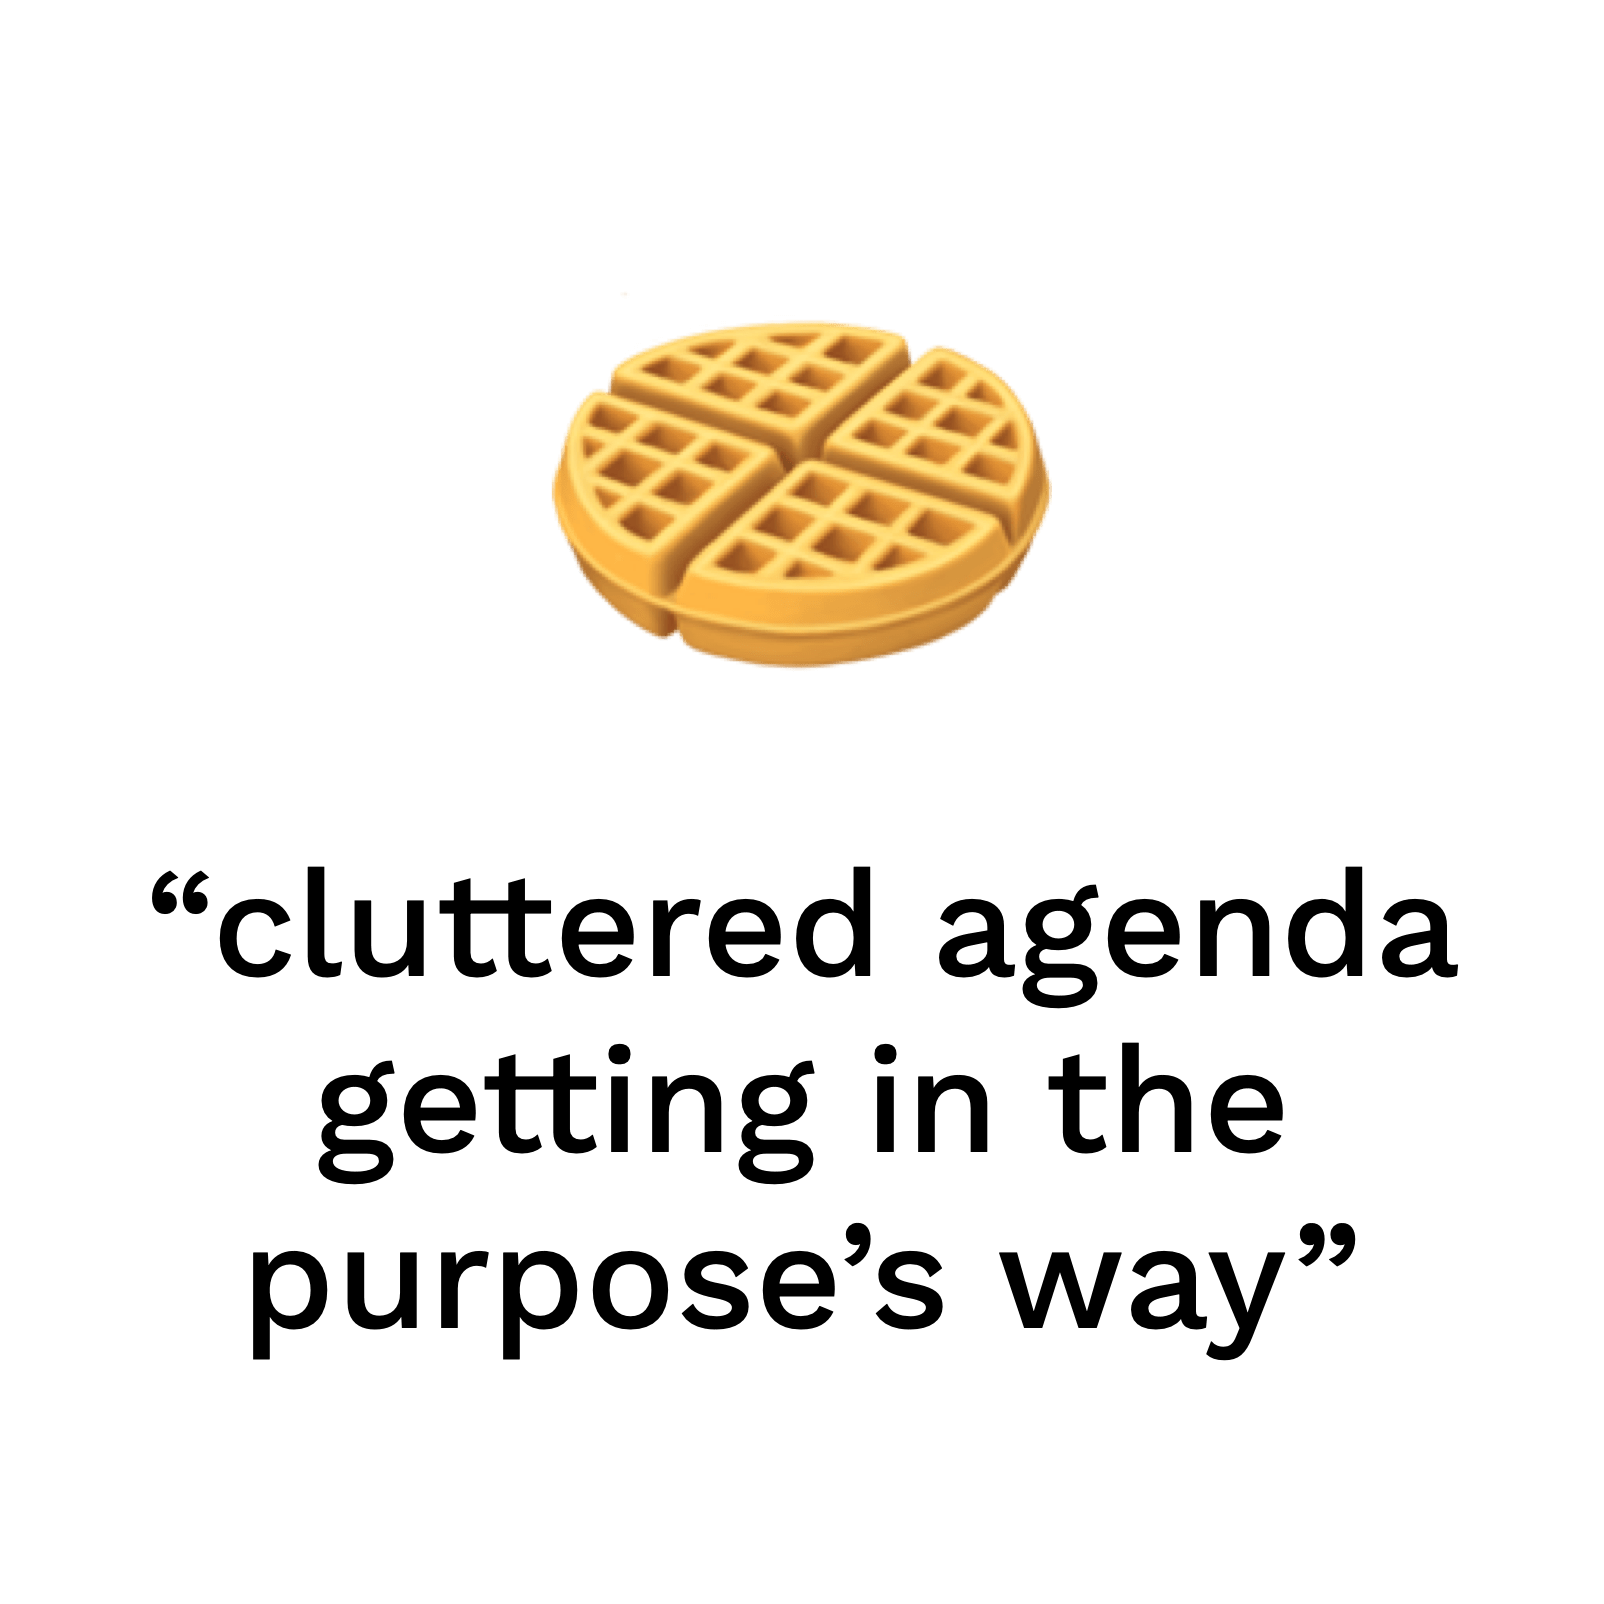 "cluttered agenda getting in the purpose's way"